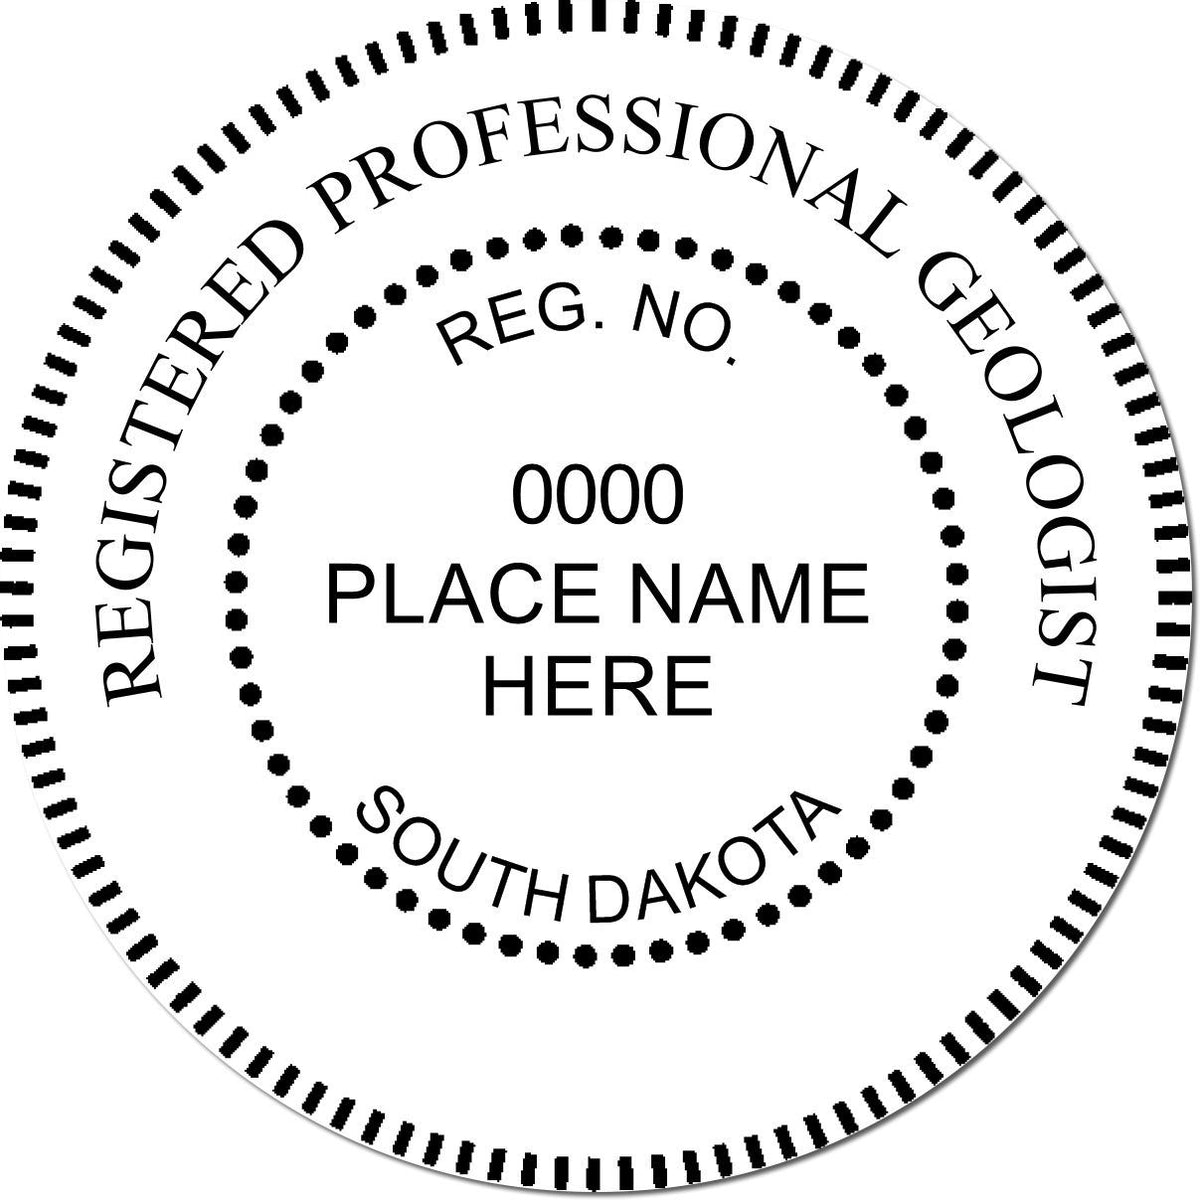 This paper is stamped with a sample imprint of the Digital South Dakota Geologist Stamp, Electronic Seal for South Dakota Geologist, signifying its quality and reliability.